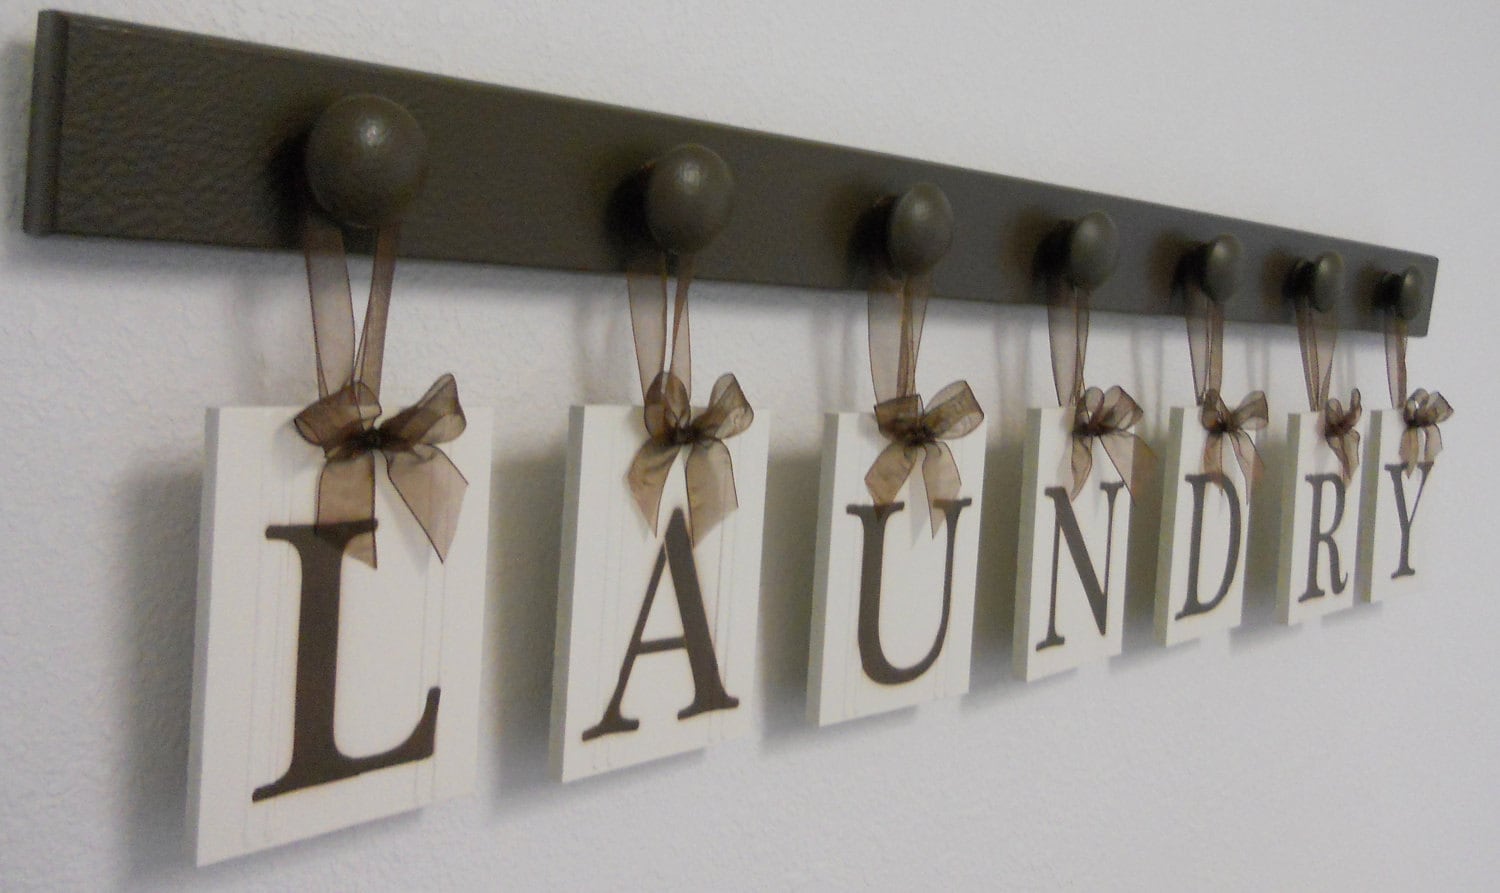 Laundry Room Wall Decor Personalized Hanging by NelsonsGifts